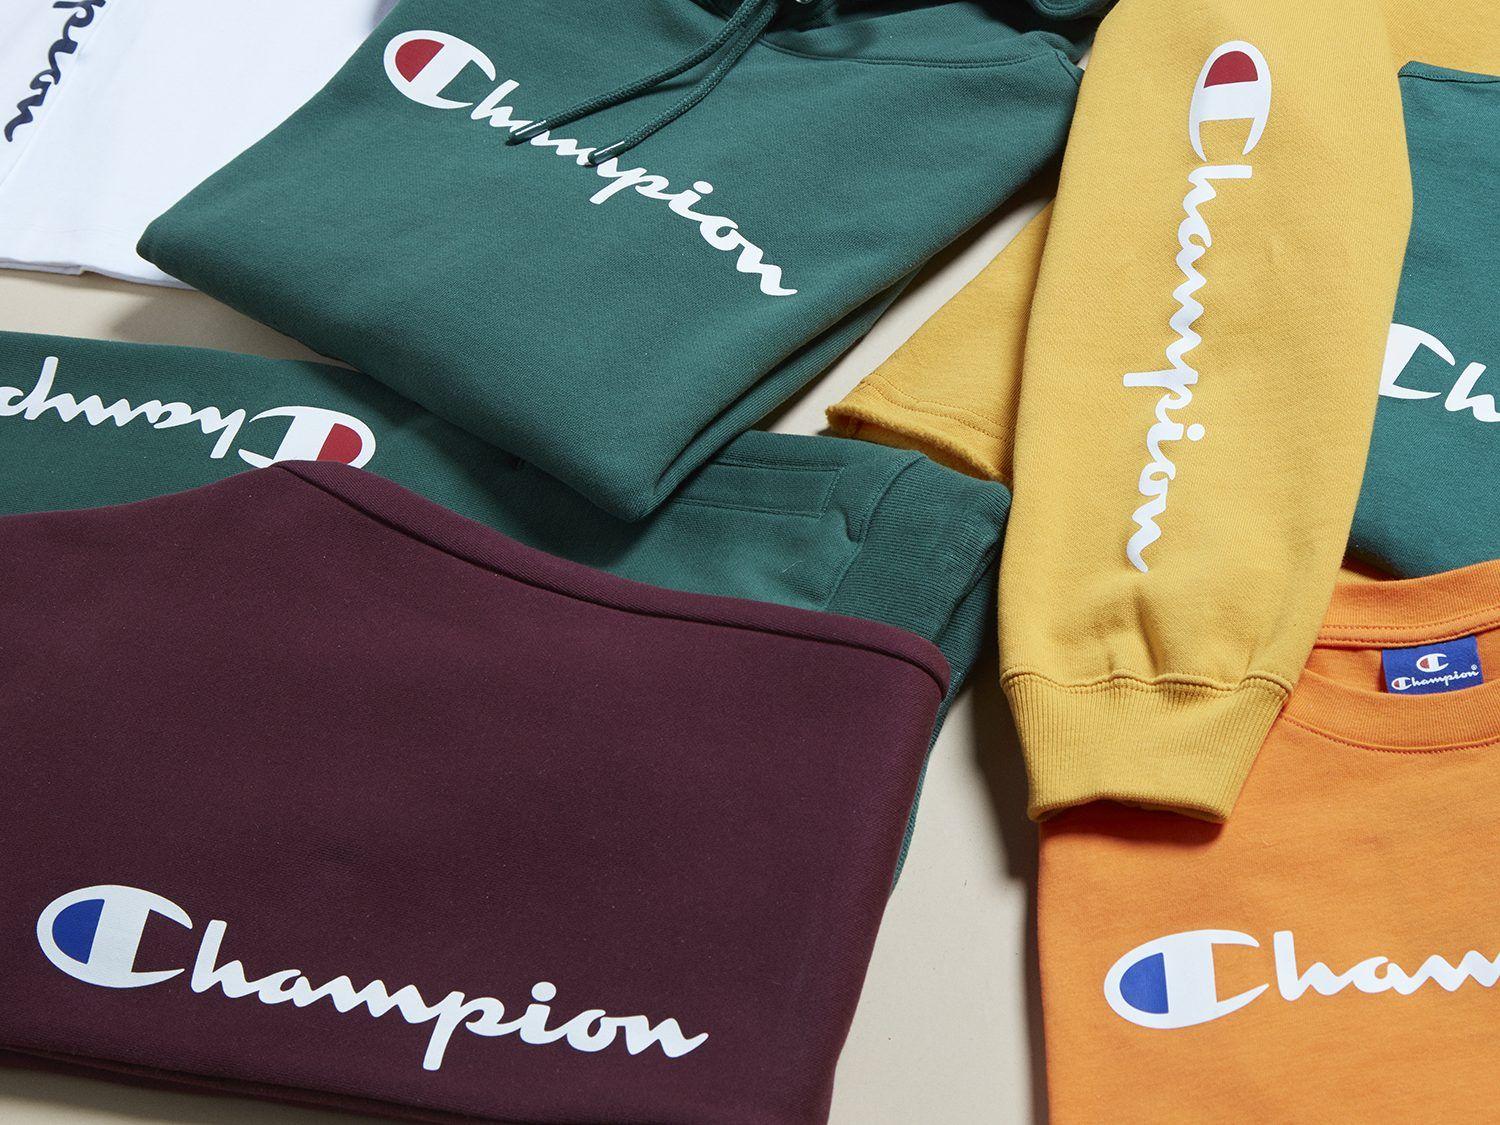 where to buy champion brand clothes